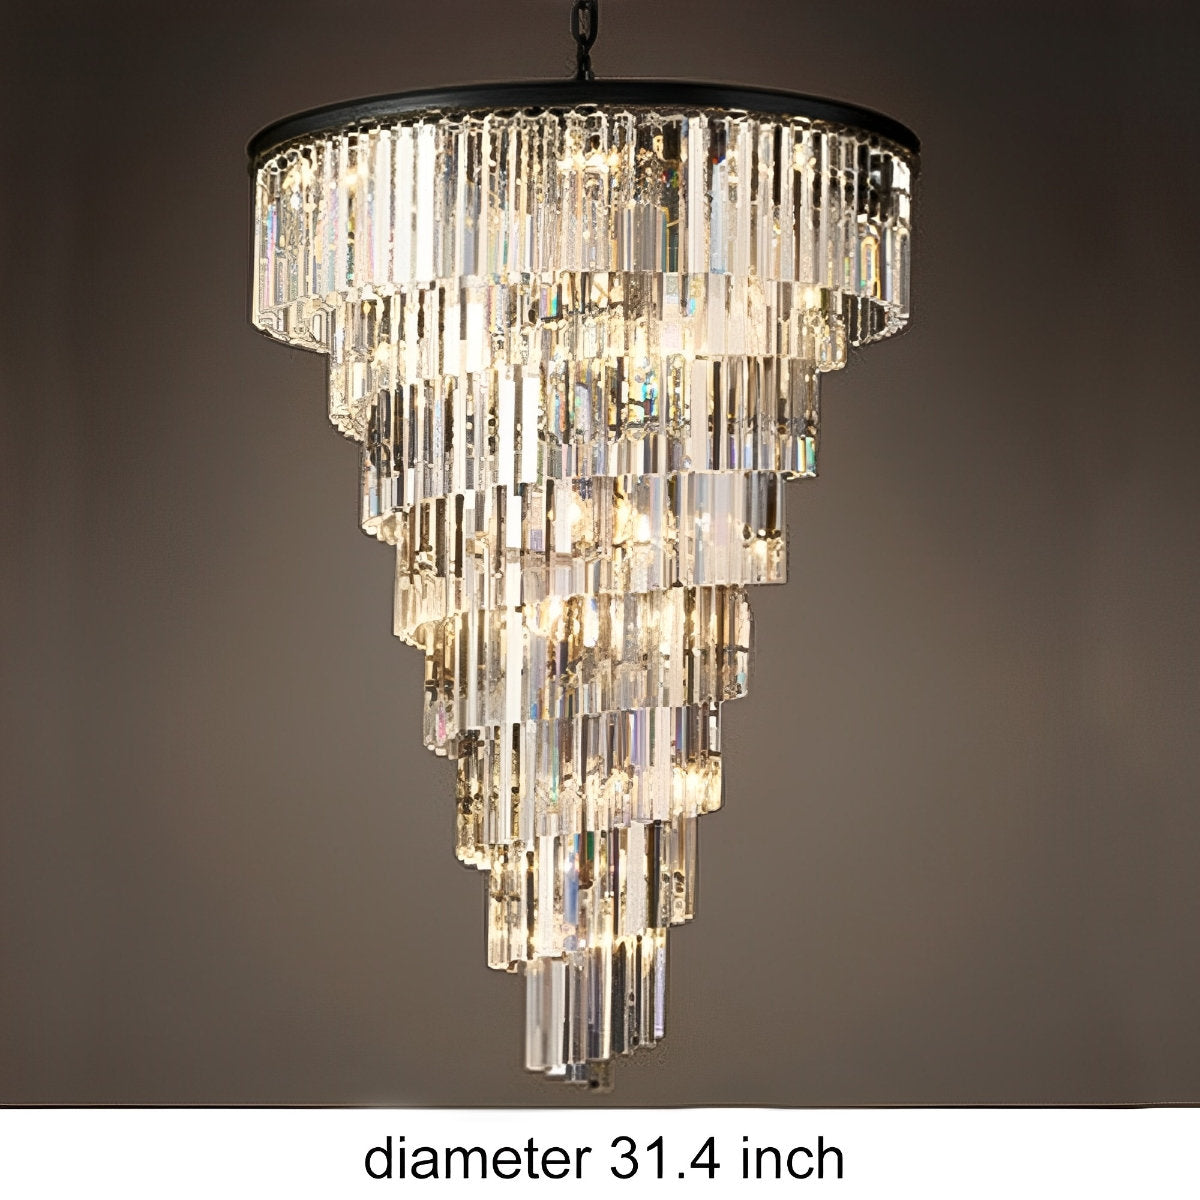 Classical Rustic Spiral Shining Crystal Chandelier - Flyachilles